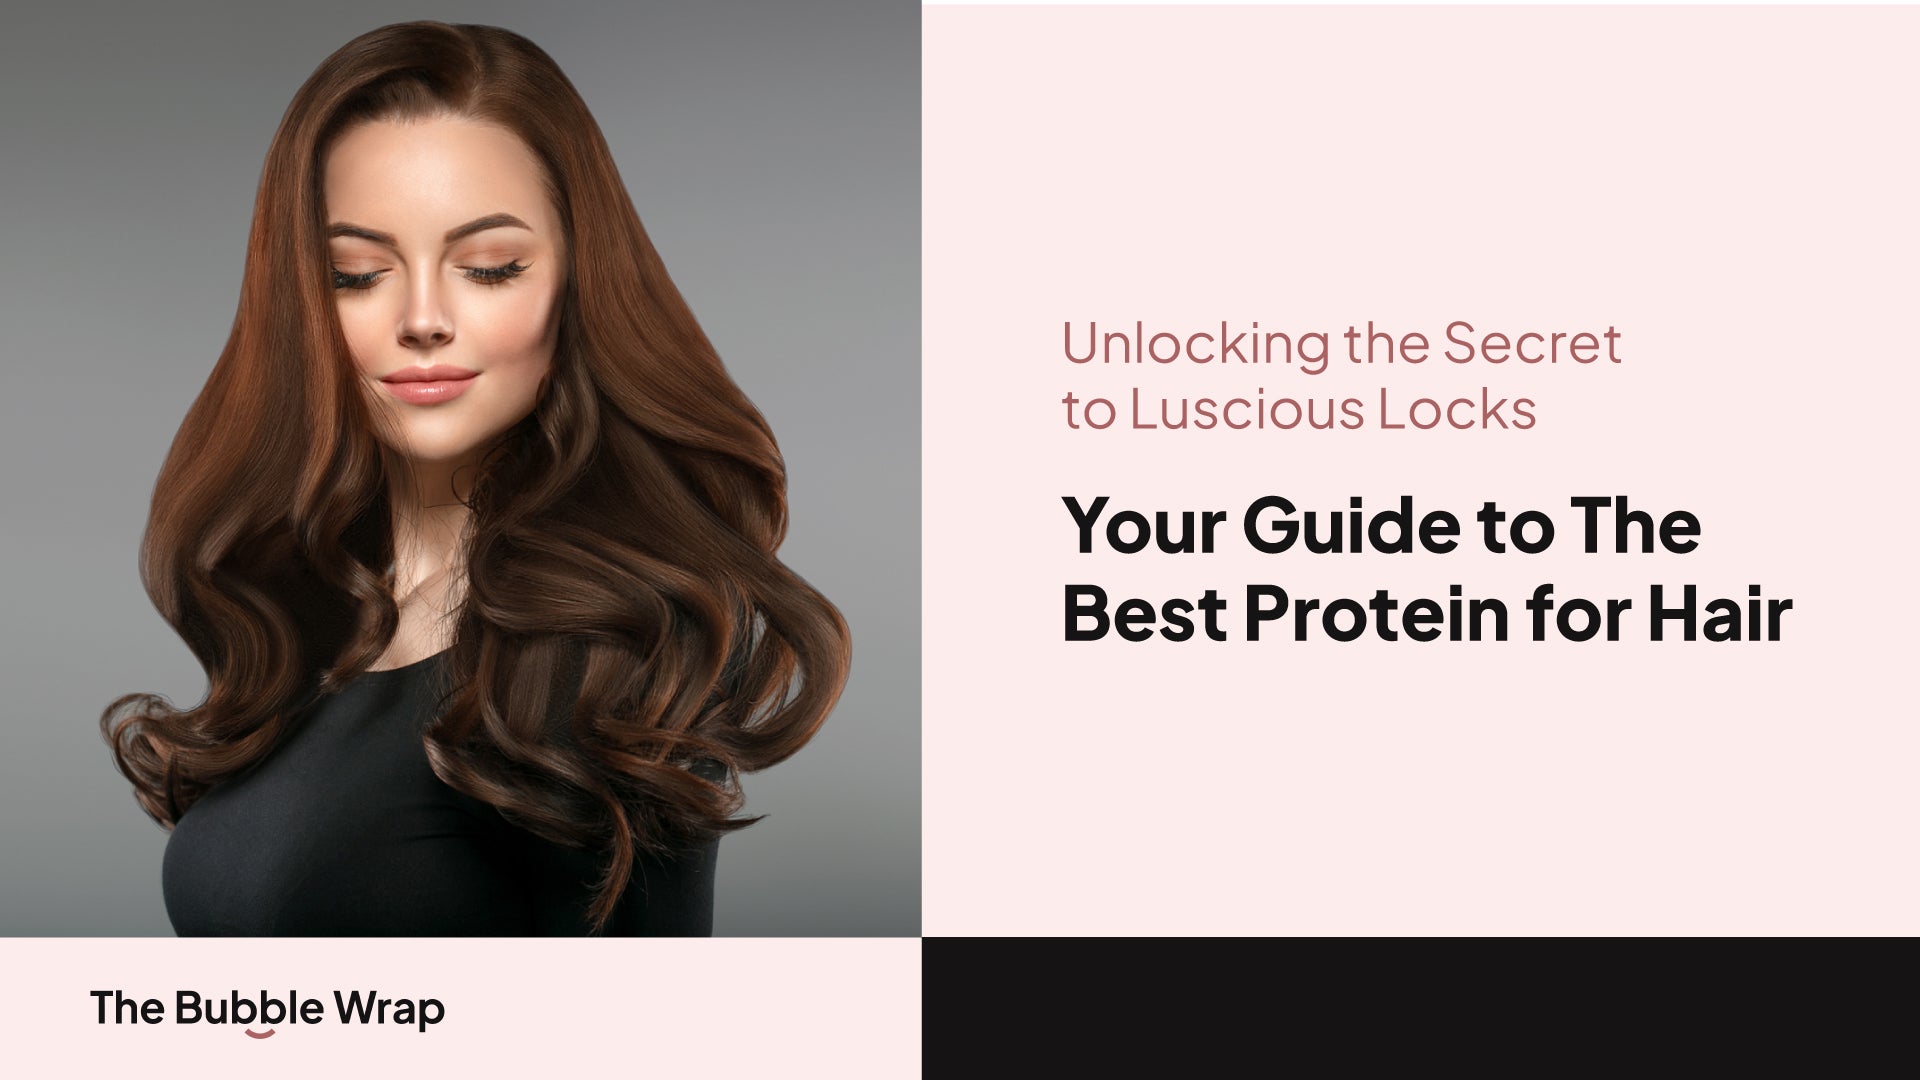 Unlocking the Secret to Luscious Locks: Your Guide to the Best Protein for Hair